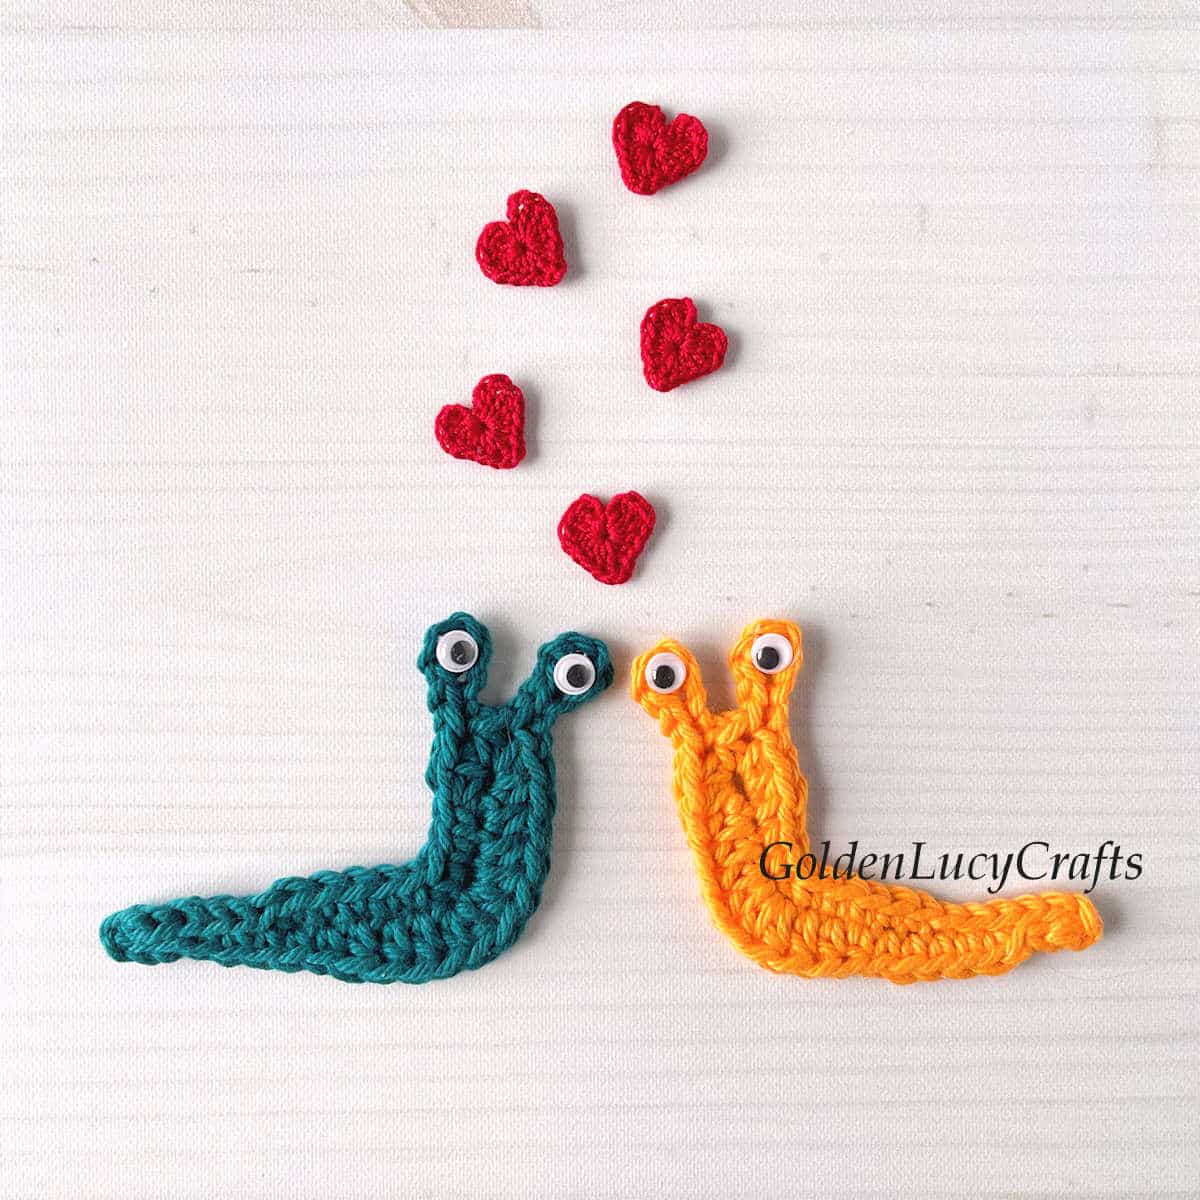 Two crochet slug appliques and small red hearts above them.